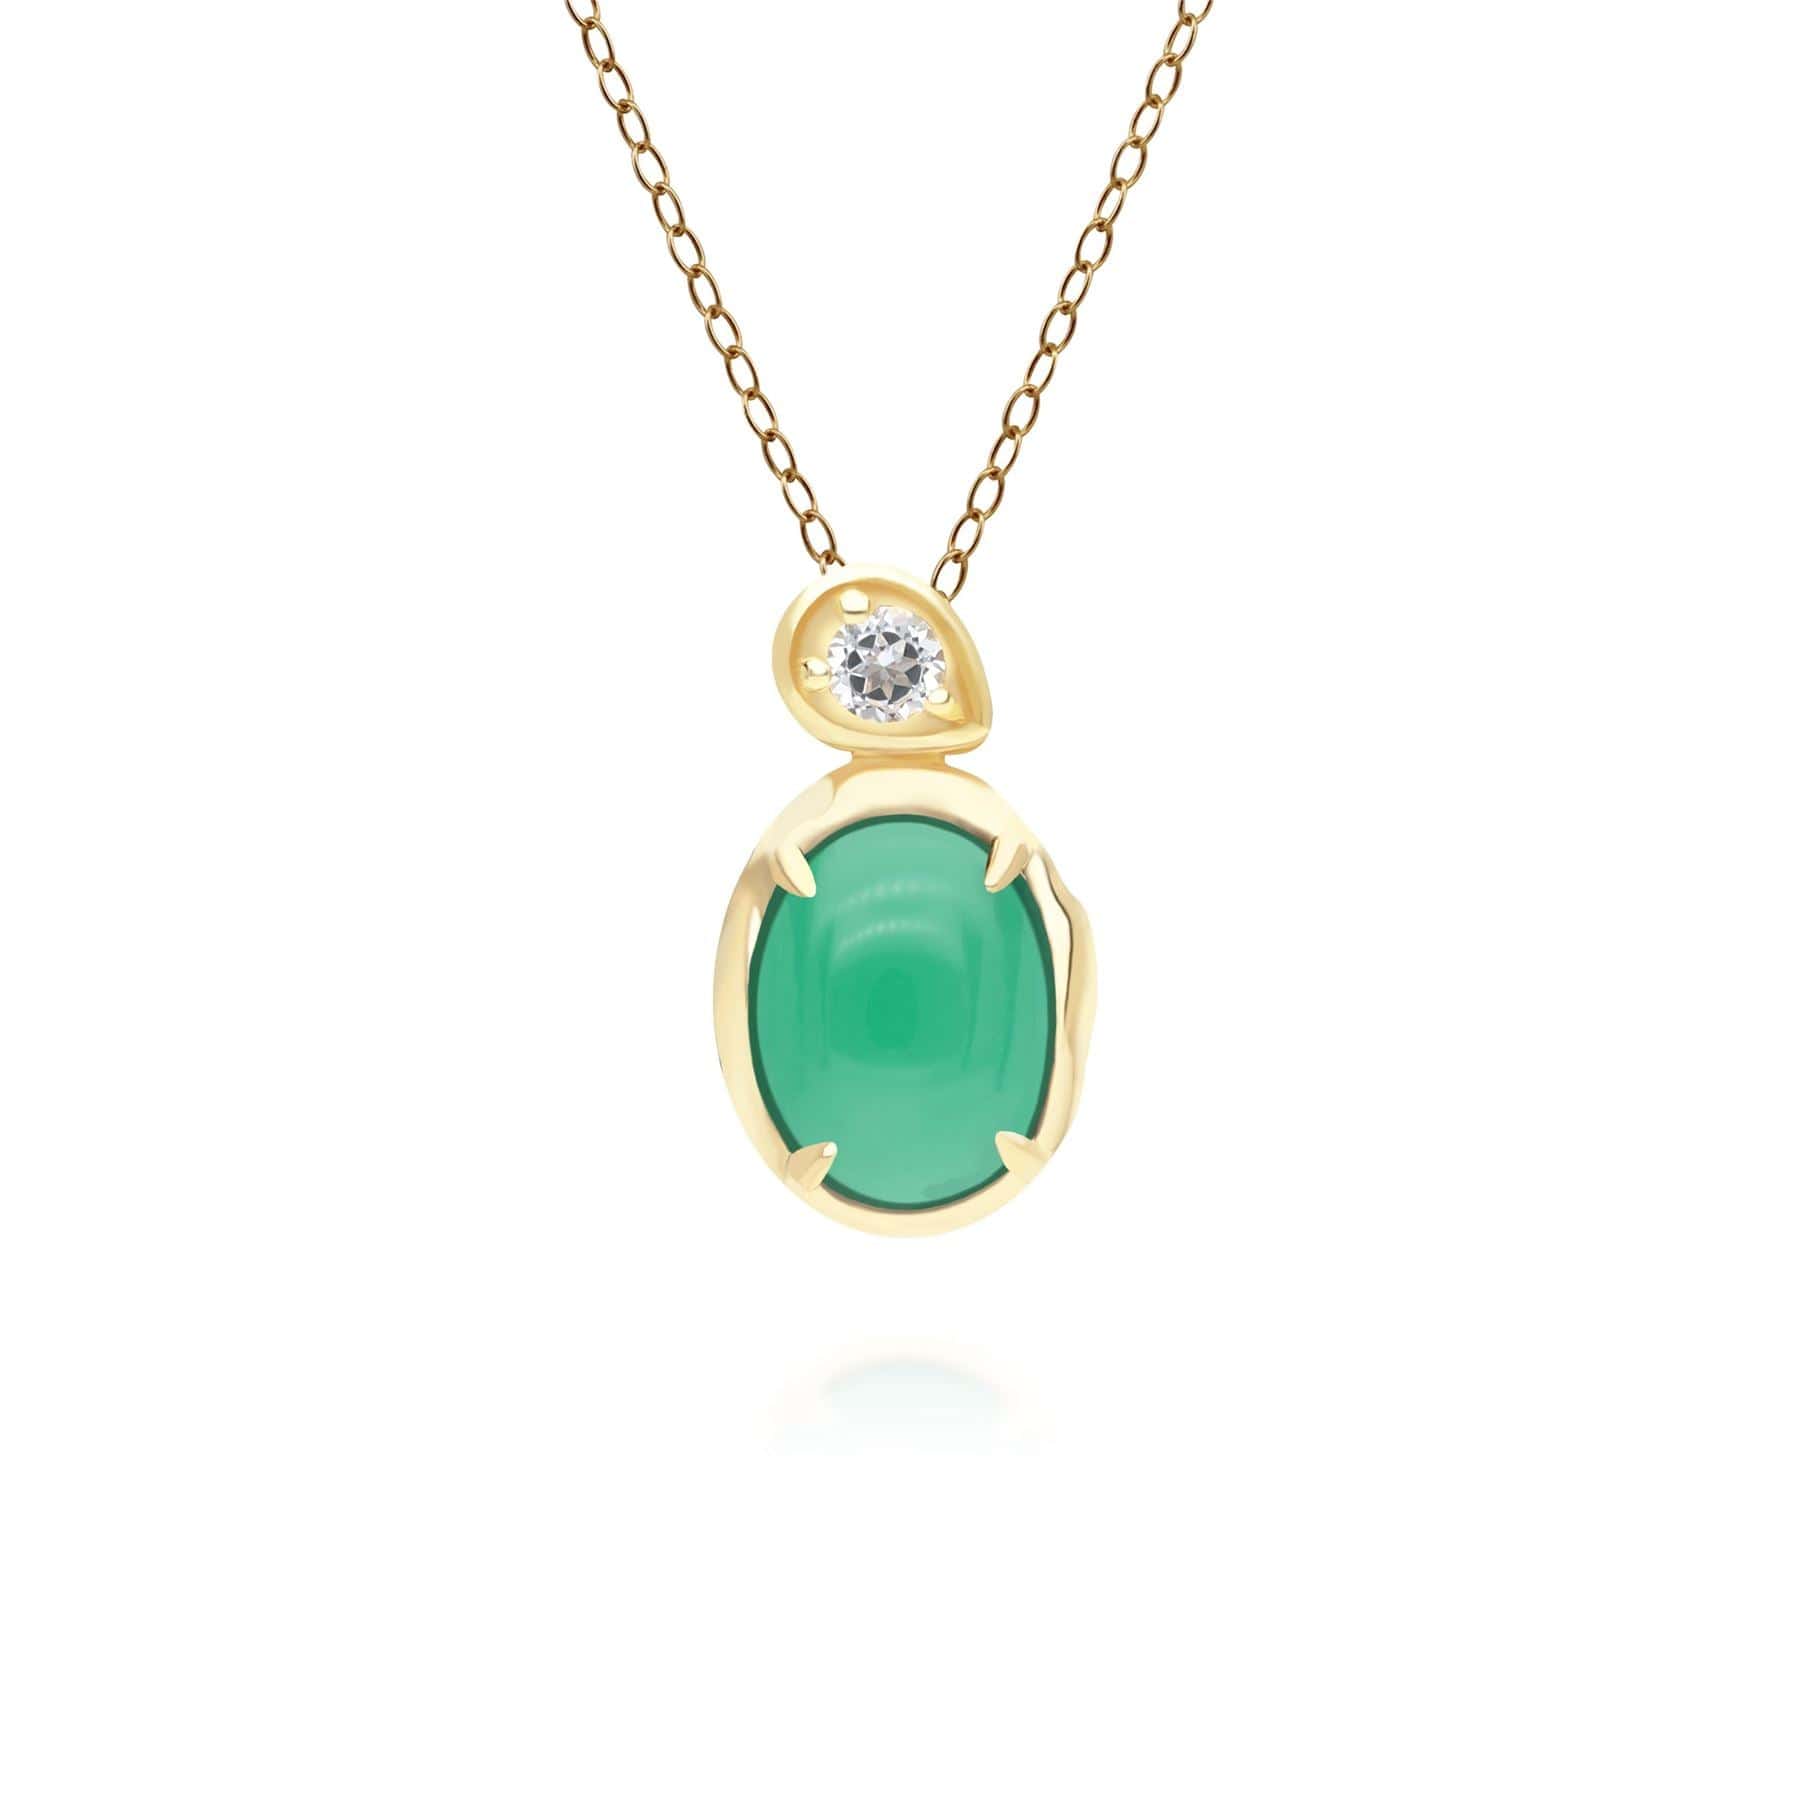 Irregular Oval Dyed Green Chalcedony & Topaz Pendant In 18ct Gold Plated SterlIng Silver